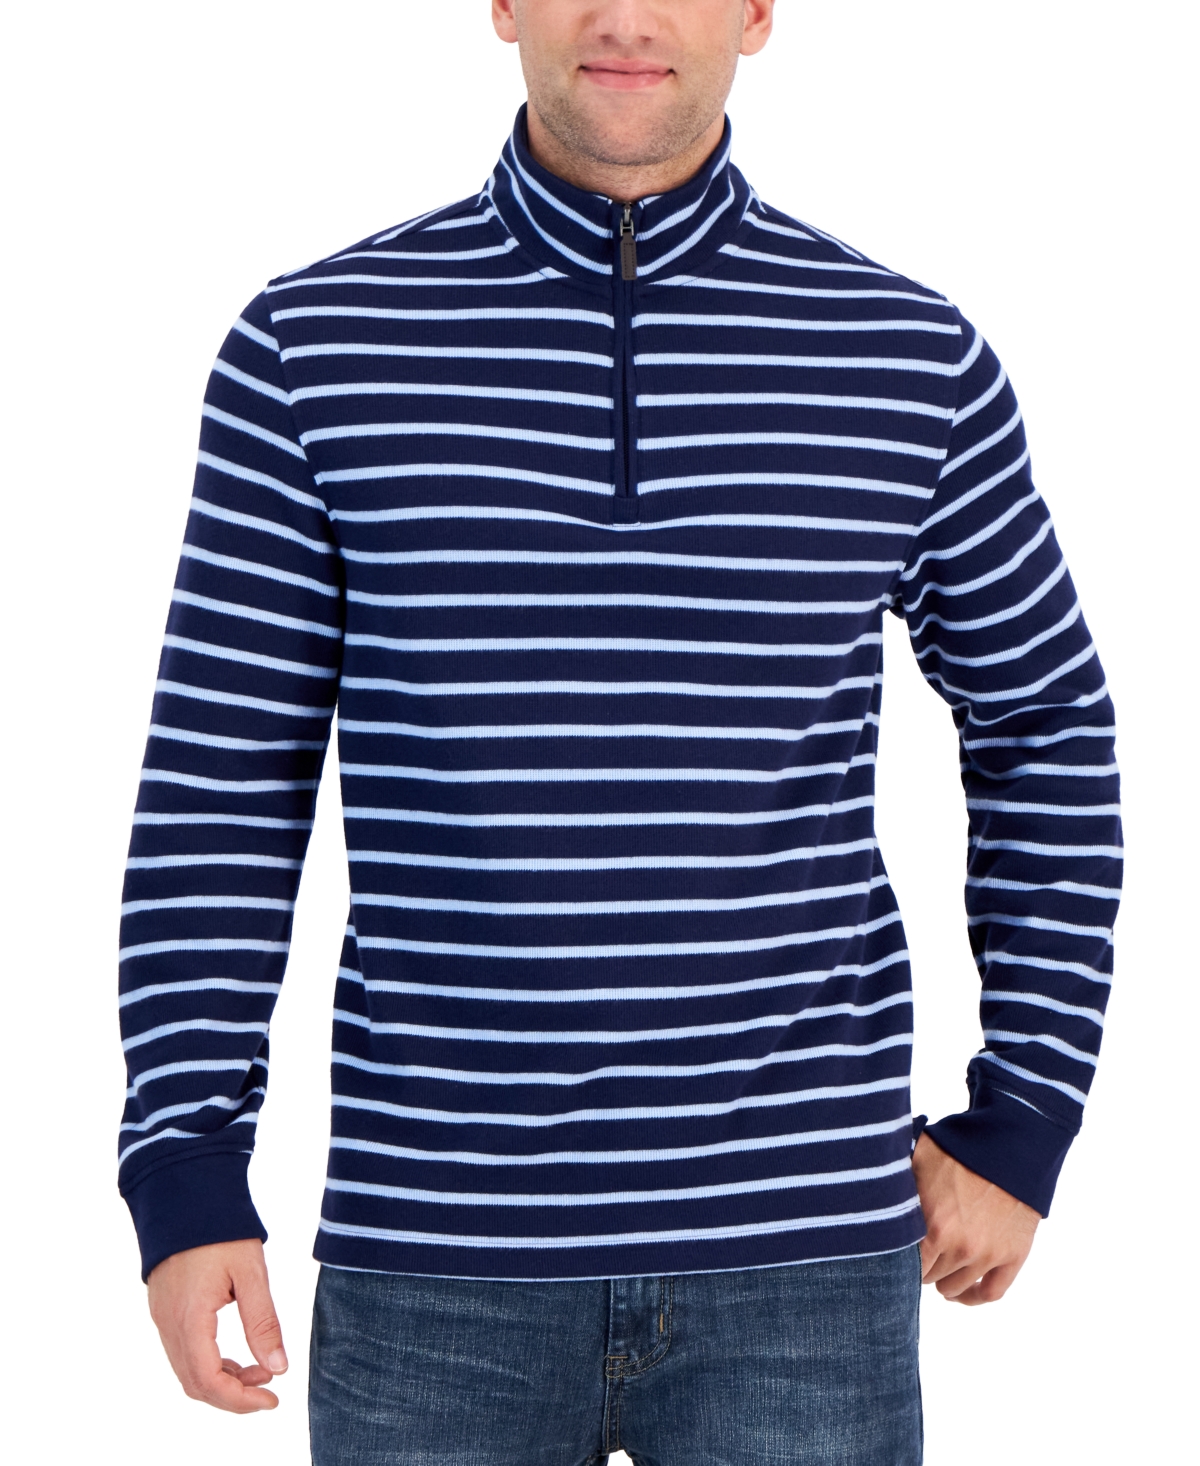 Men's Classic Fit Striped French Rib Quarter-Zip Sweater, Created for Macy's - Navy Blue